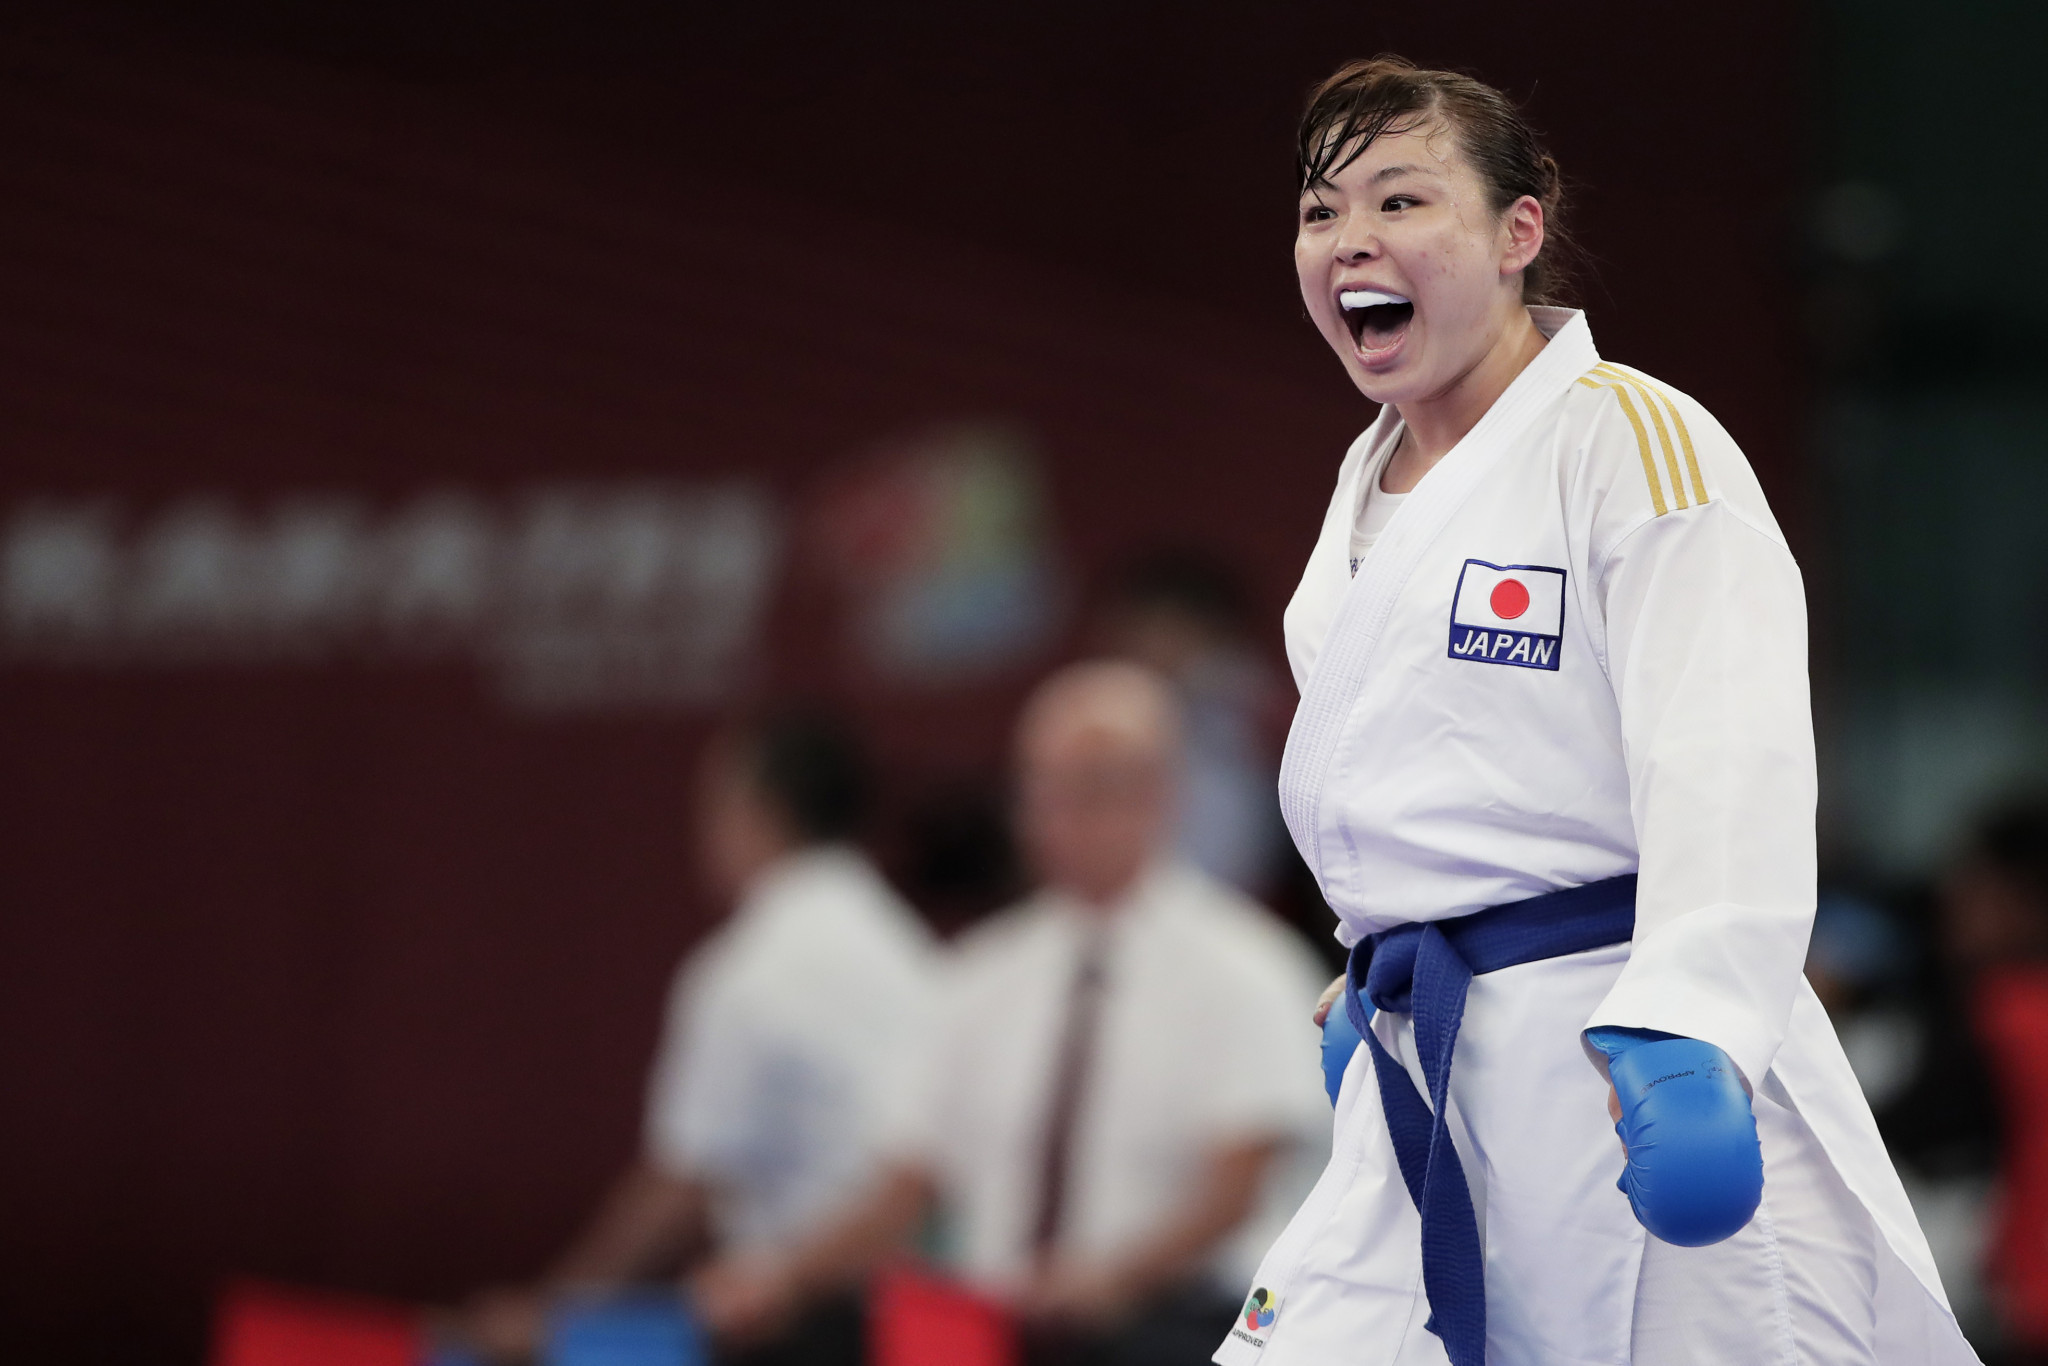 Ayumi Uekusa won one of the eight gold medals for Japan today in Tashkent ©Getty Images